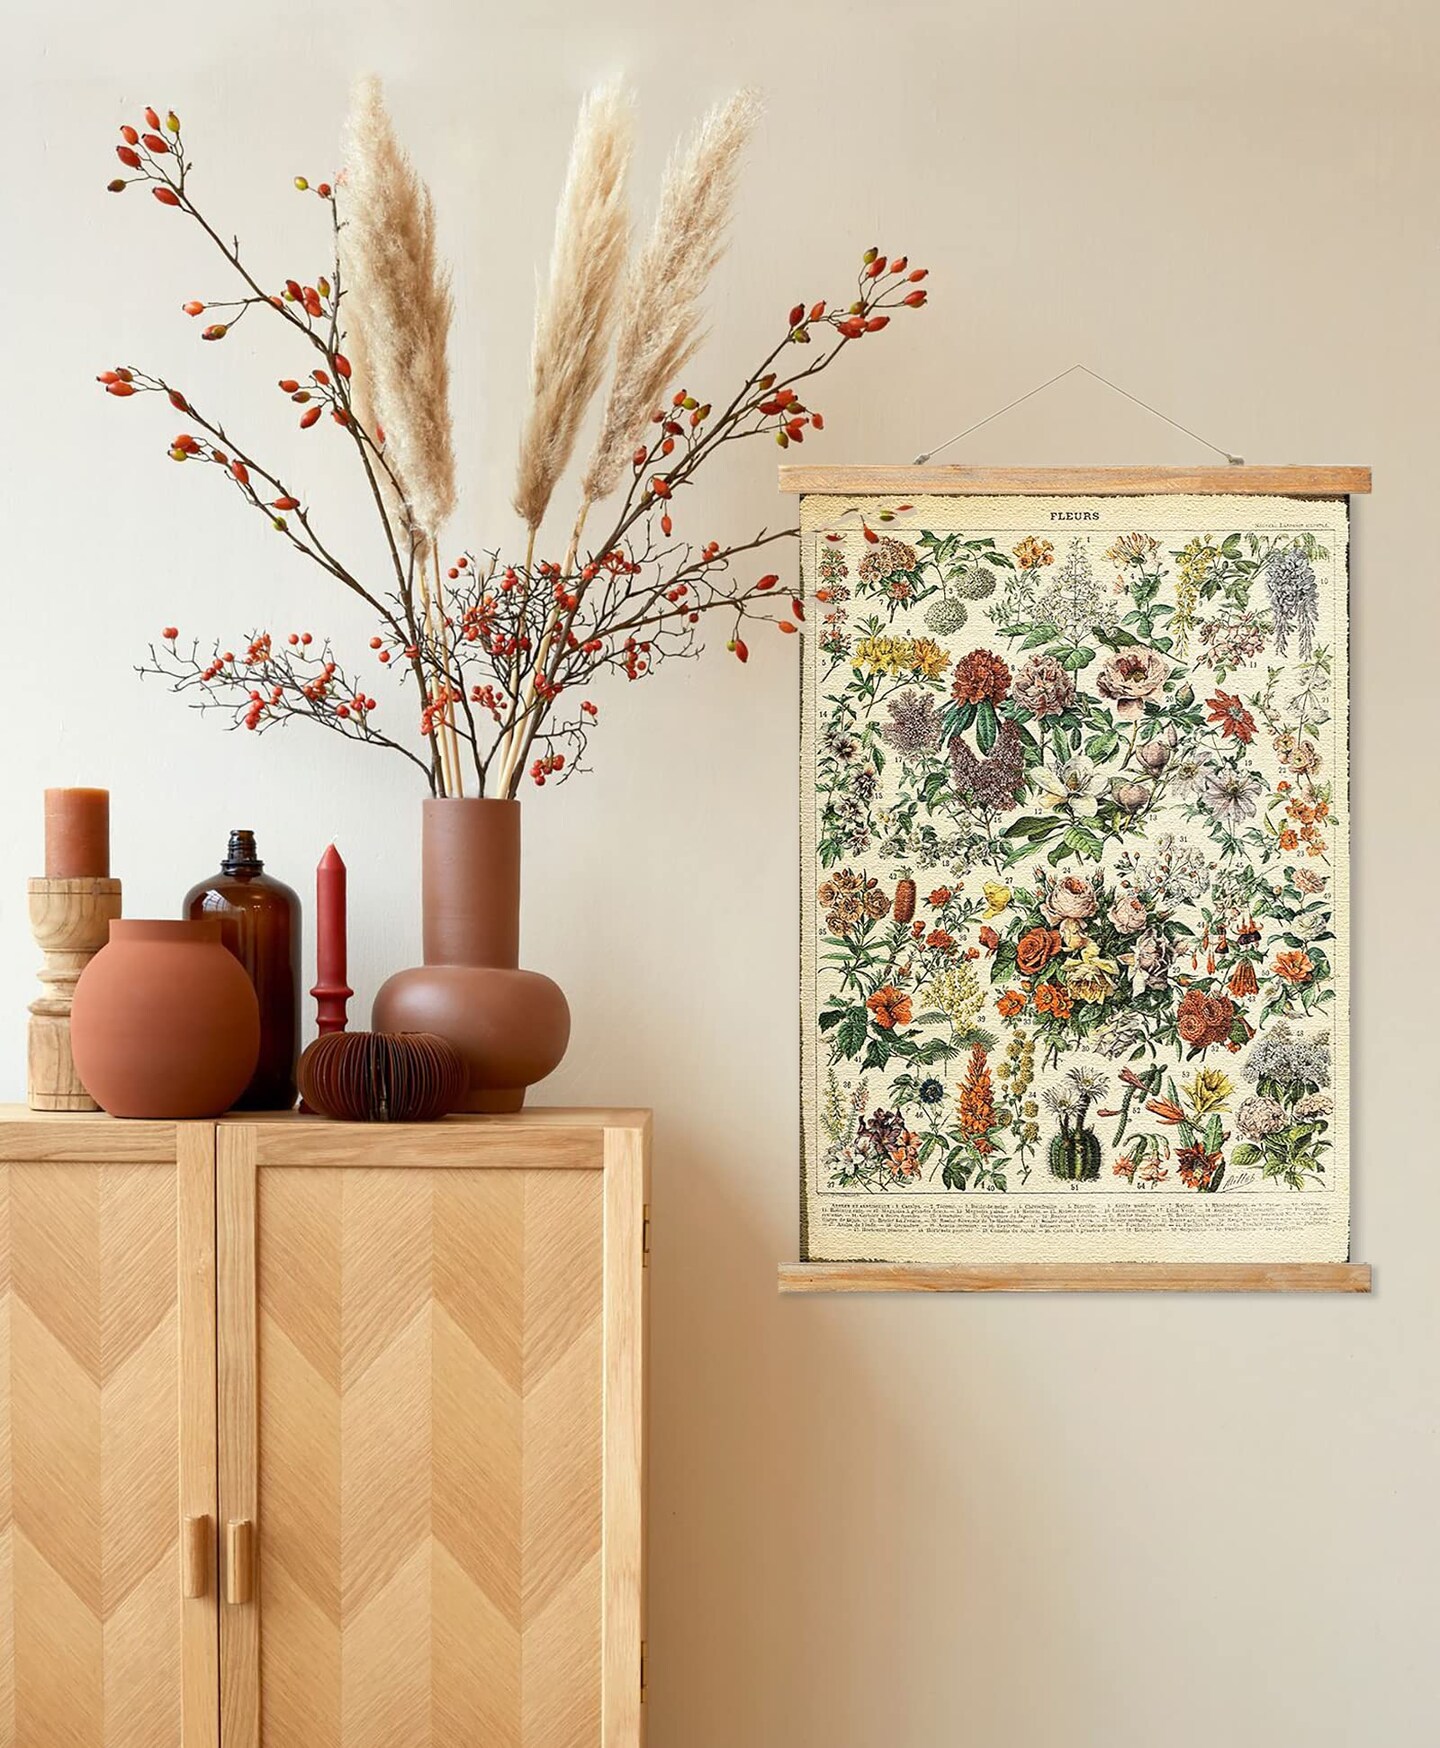 Vintage Flower Poster Hanger Frame, Retro Style Wall Art Prints, Printed on Linen with Natural Wooden Frames, Wall Hanging Decor